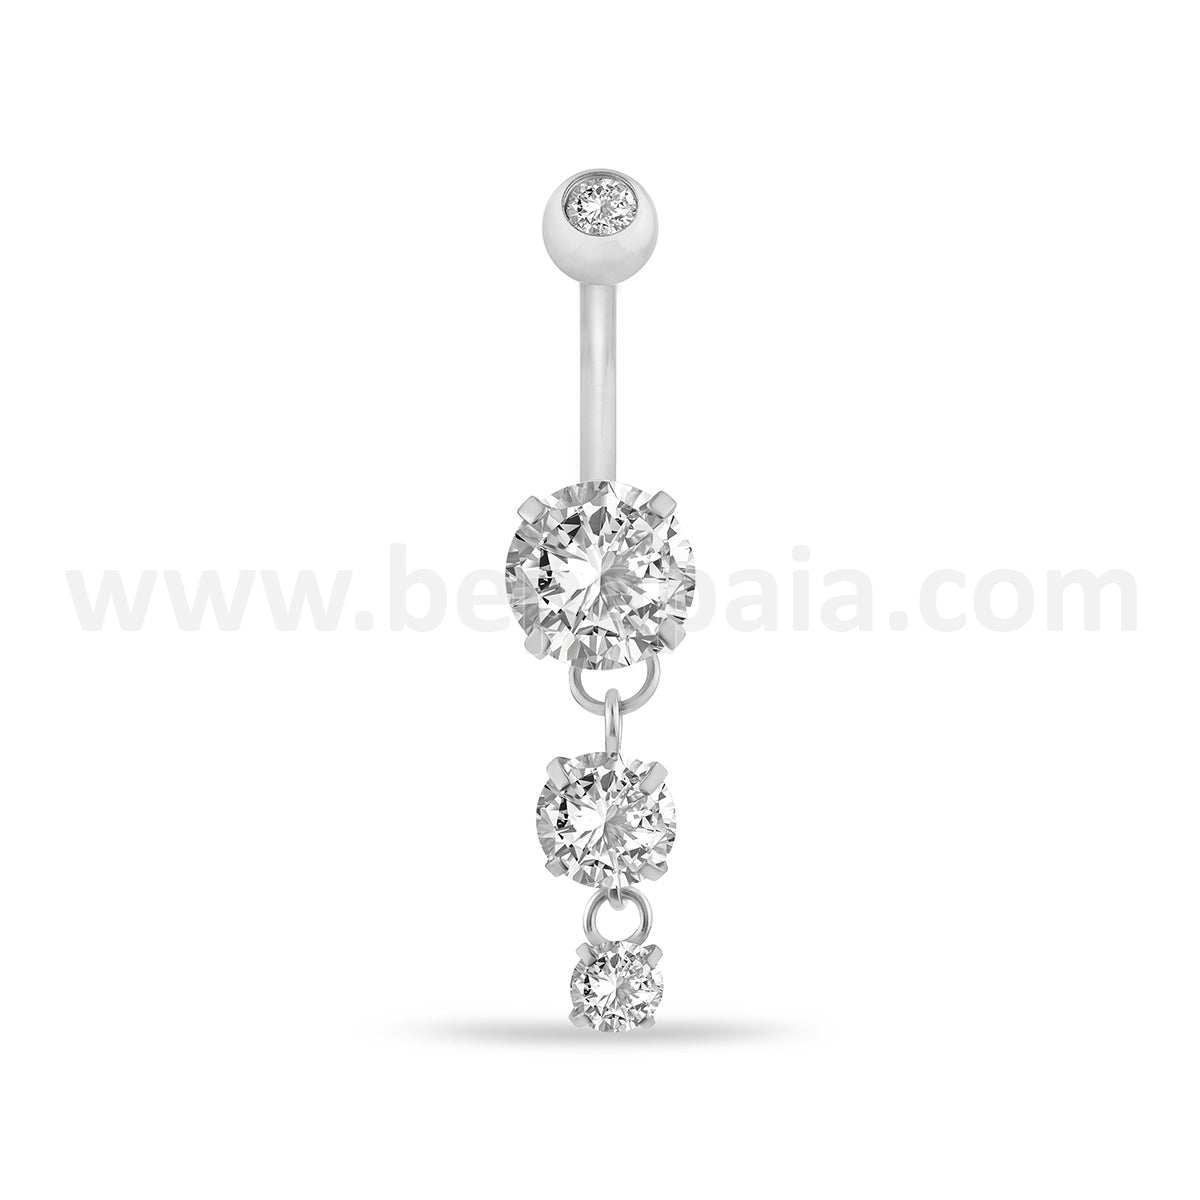 Surgical steel belly ring with 3 cubic zirconia